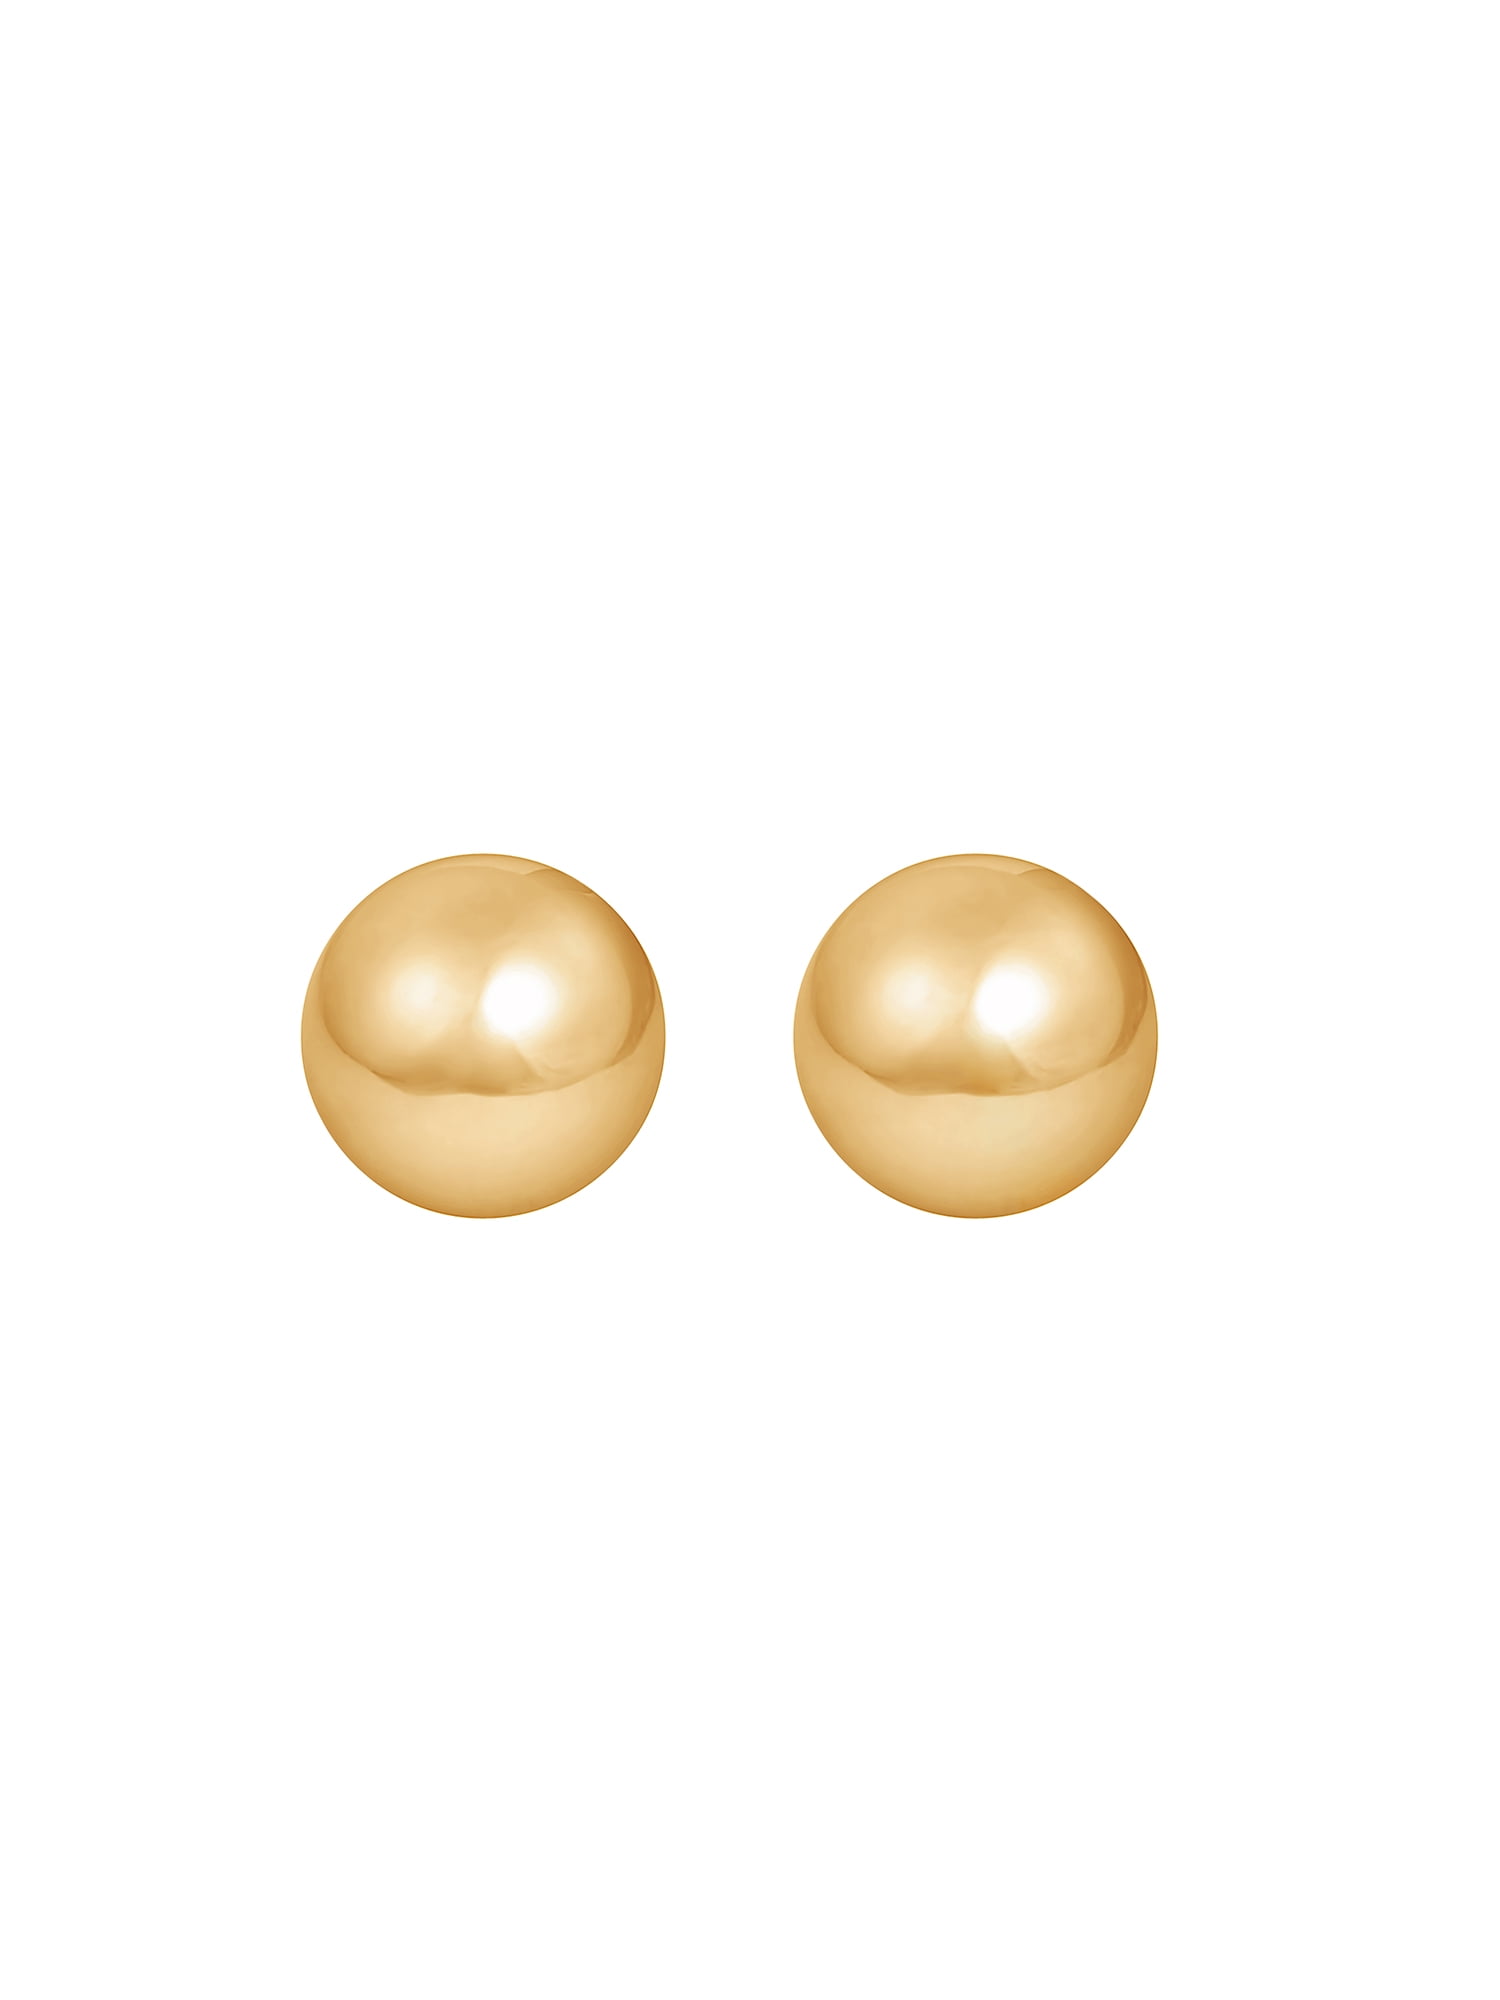 8mm **PAIR* Stamped Authentic Ball 10K Yellow Gold GOLD Stud Earrings 10KT